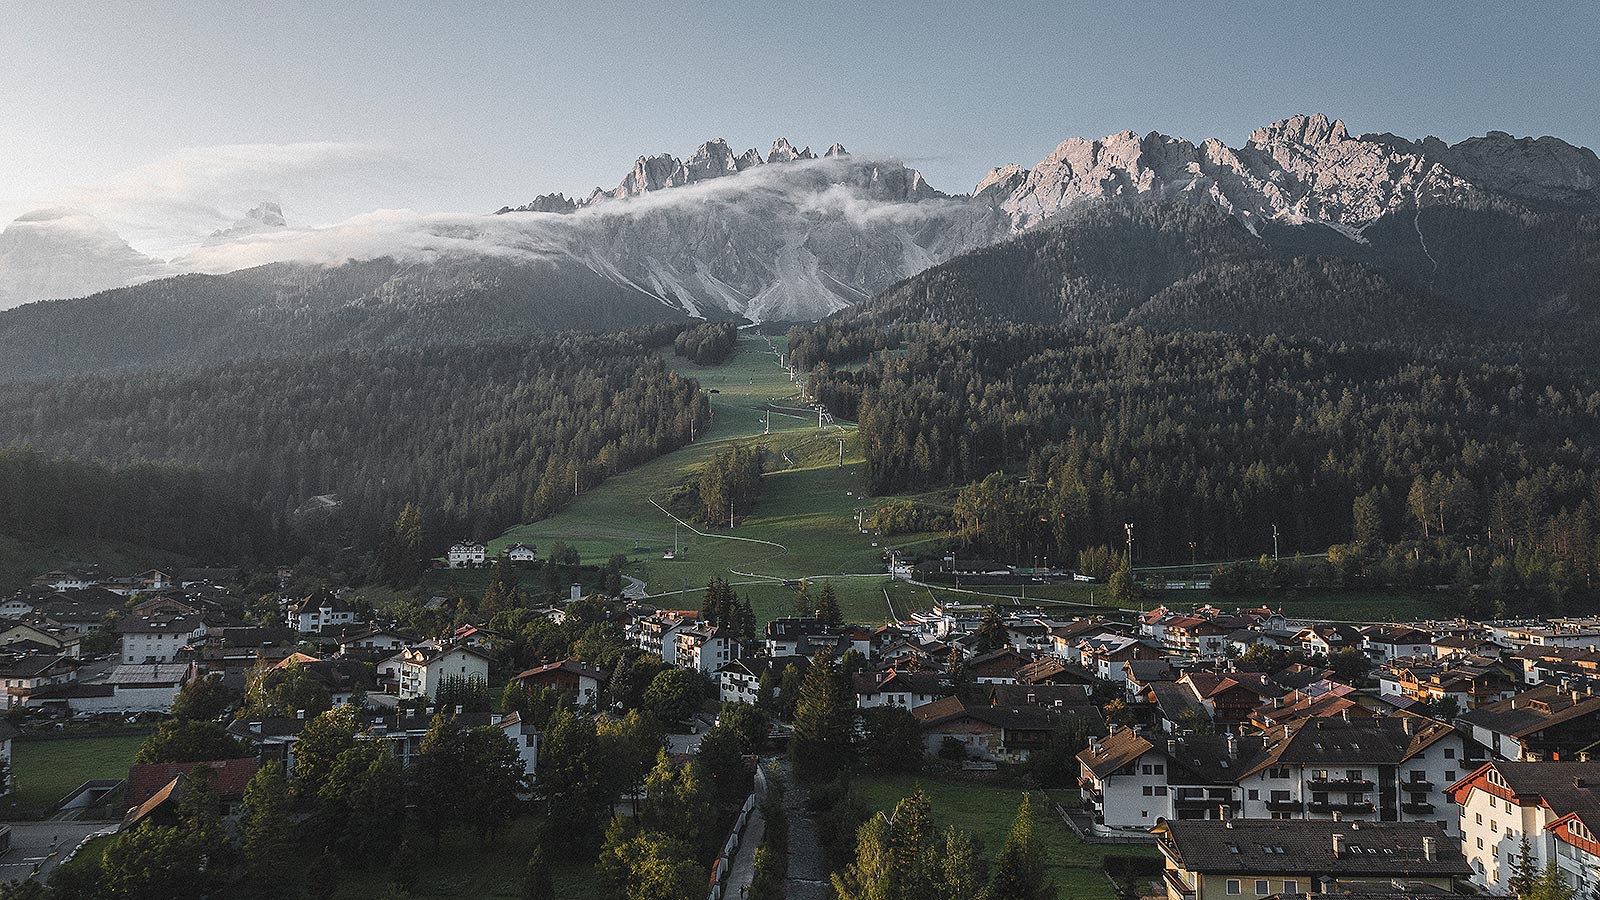 Panoramic view of the village of San Candido in the foreground and the snow-capped mountains in the background, which can be reached by funicular railway in the centre of the picture. 